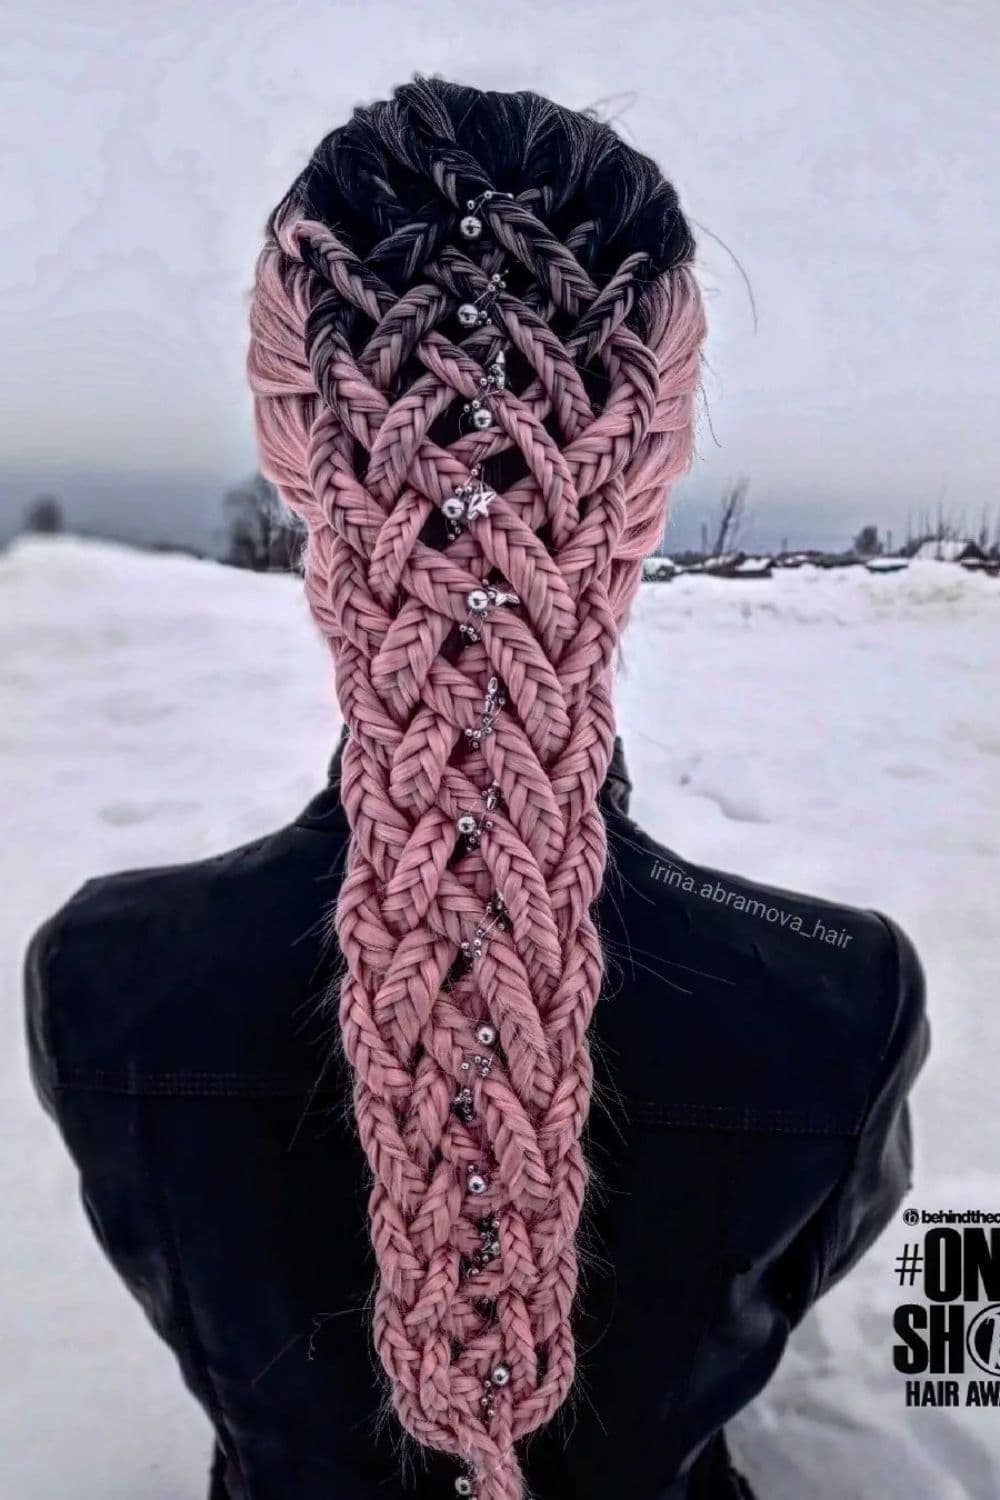 A mannequin with black and pink fishtail braids.